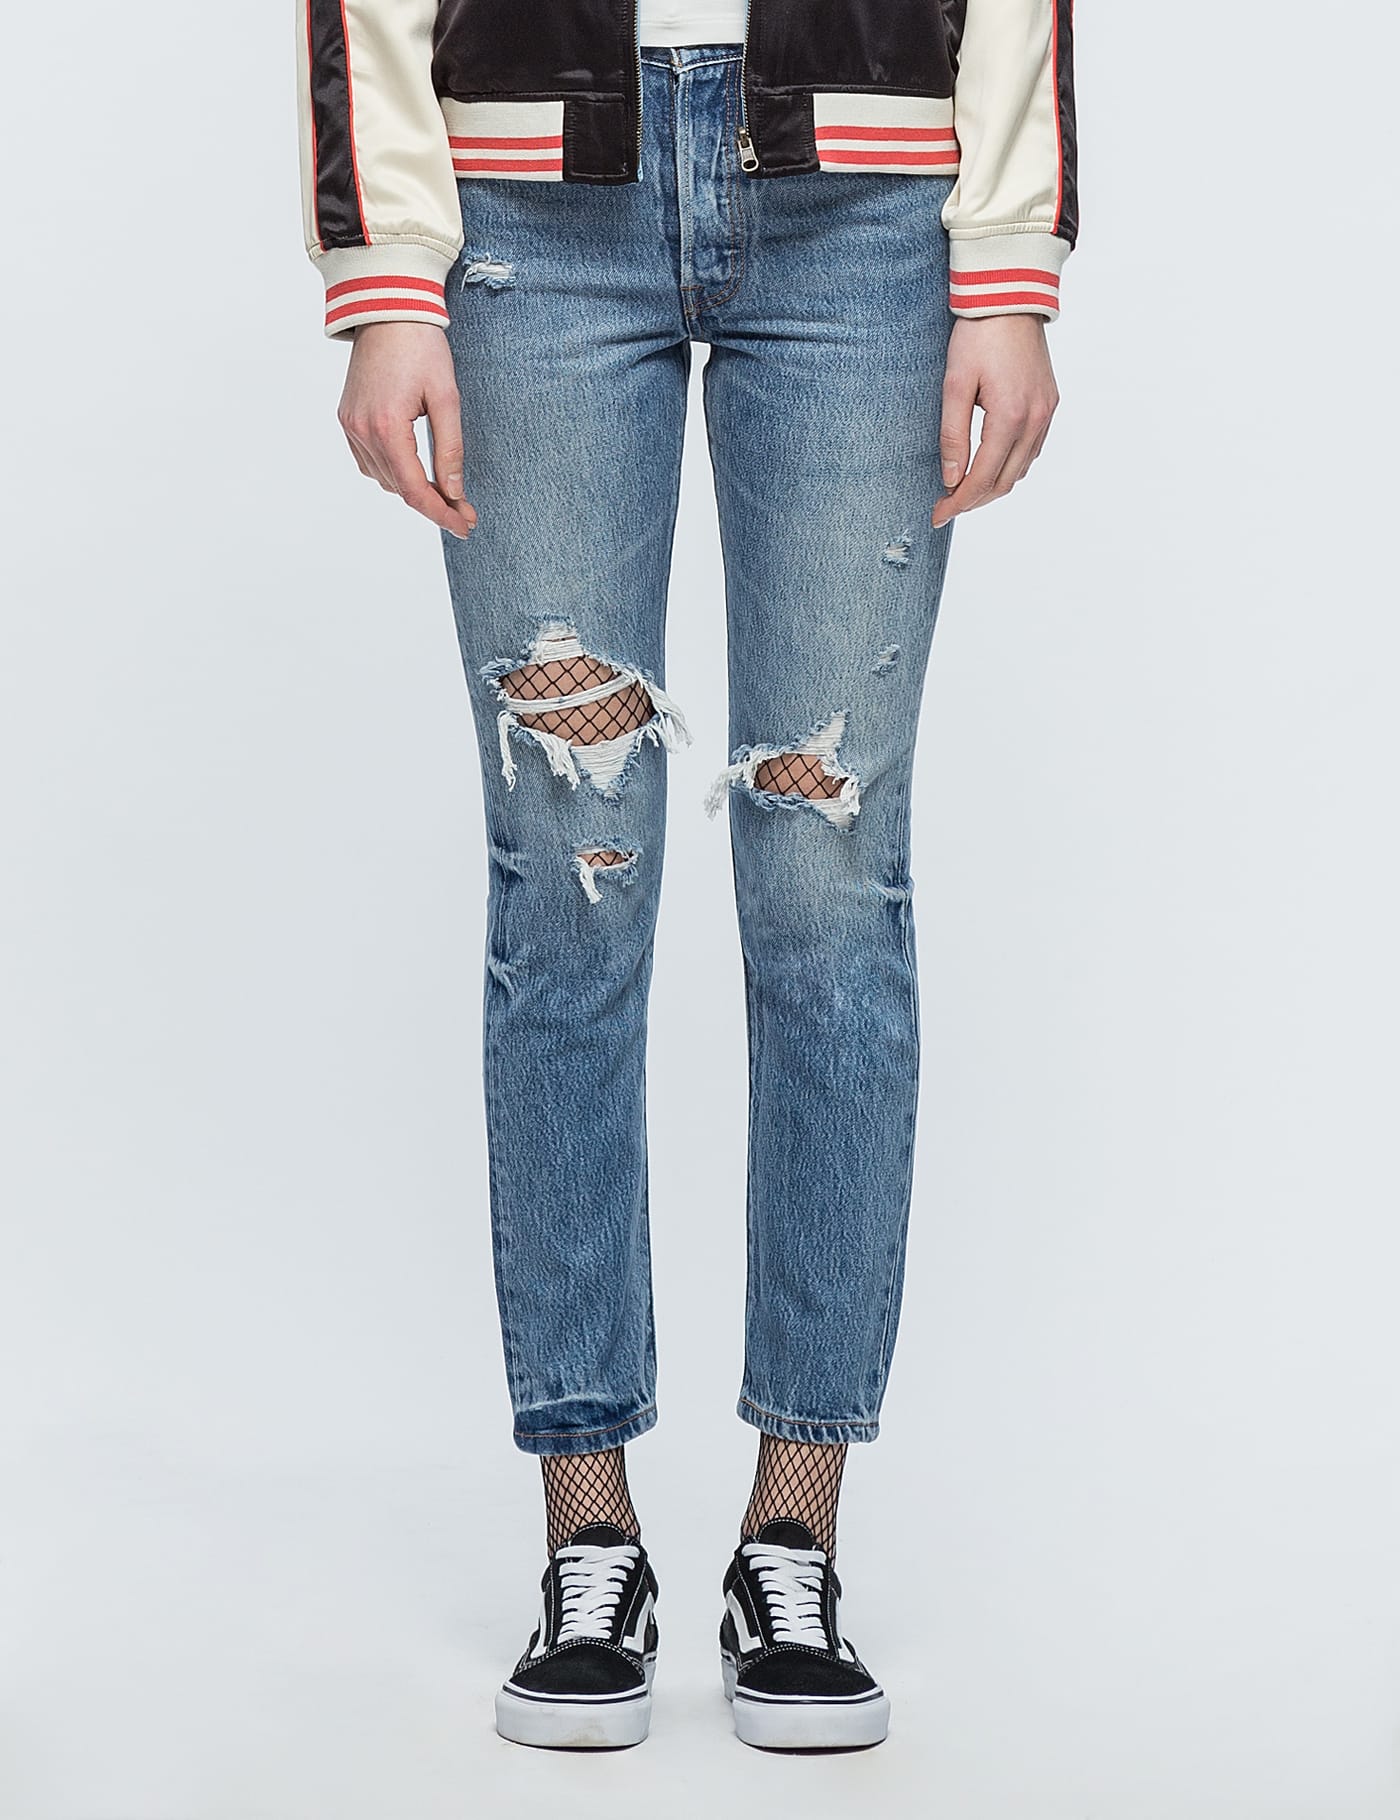 levi's 501 skinny jeans in old hangouts